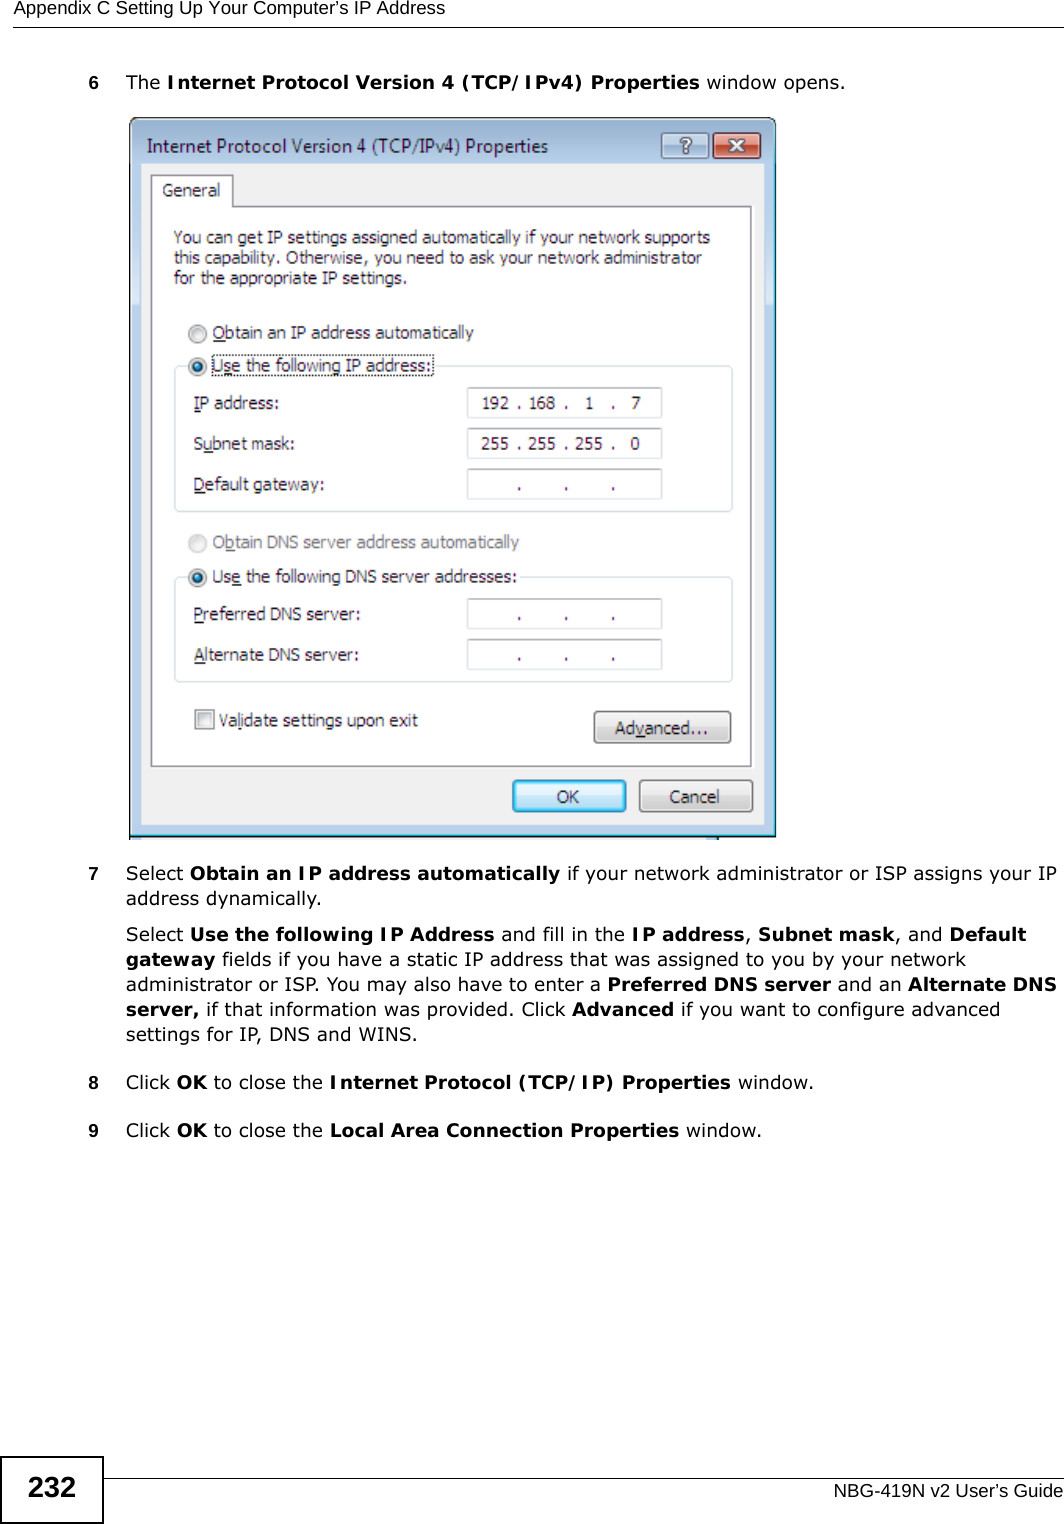 Appendix C Setting Up Your Computer’s IP AddressNBG-419N v2 User’s Guide2326The Internet Protocol Version 4 (TCP/IPv4) Properties window opens.7Select Obtain an IP address automatically if your network administrator or ISP assigns your IP address dynamically.Select Use the following IP Address and fill in the IP address, Subnet mask, and Default gateway fields if you have a static IP address that was assigned to you by your network administrator or ISP. You may also have to enter a Preferred DNS server and an Alternate DNS server, if that information was provided. Click Advanced if you want to configure advanced settings for IP, DNS and WINS. 8Click OK to close the Internet Protocol (TCP/IP) Properties window.9Click OK to close the Local Area Connection Properties window.